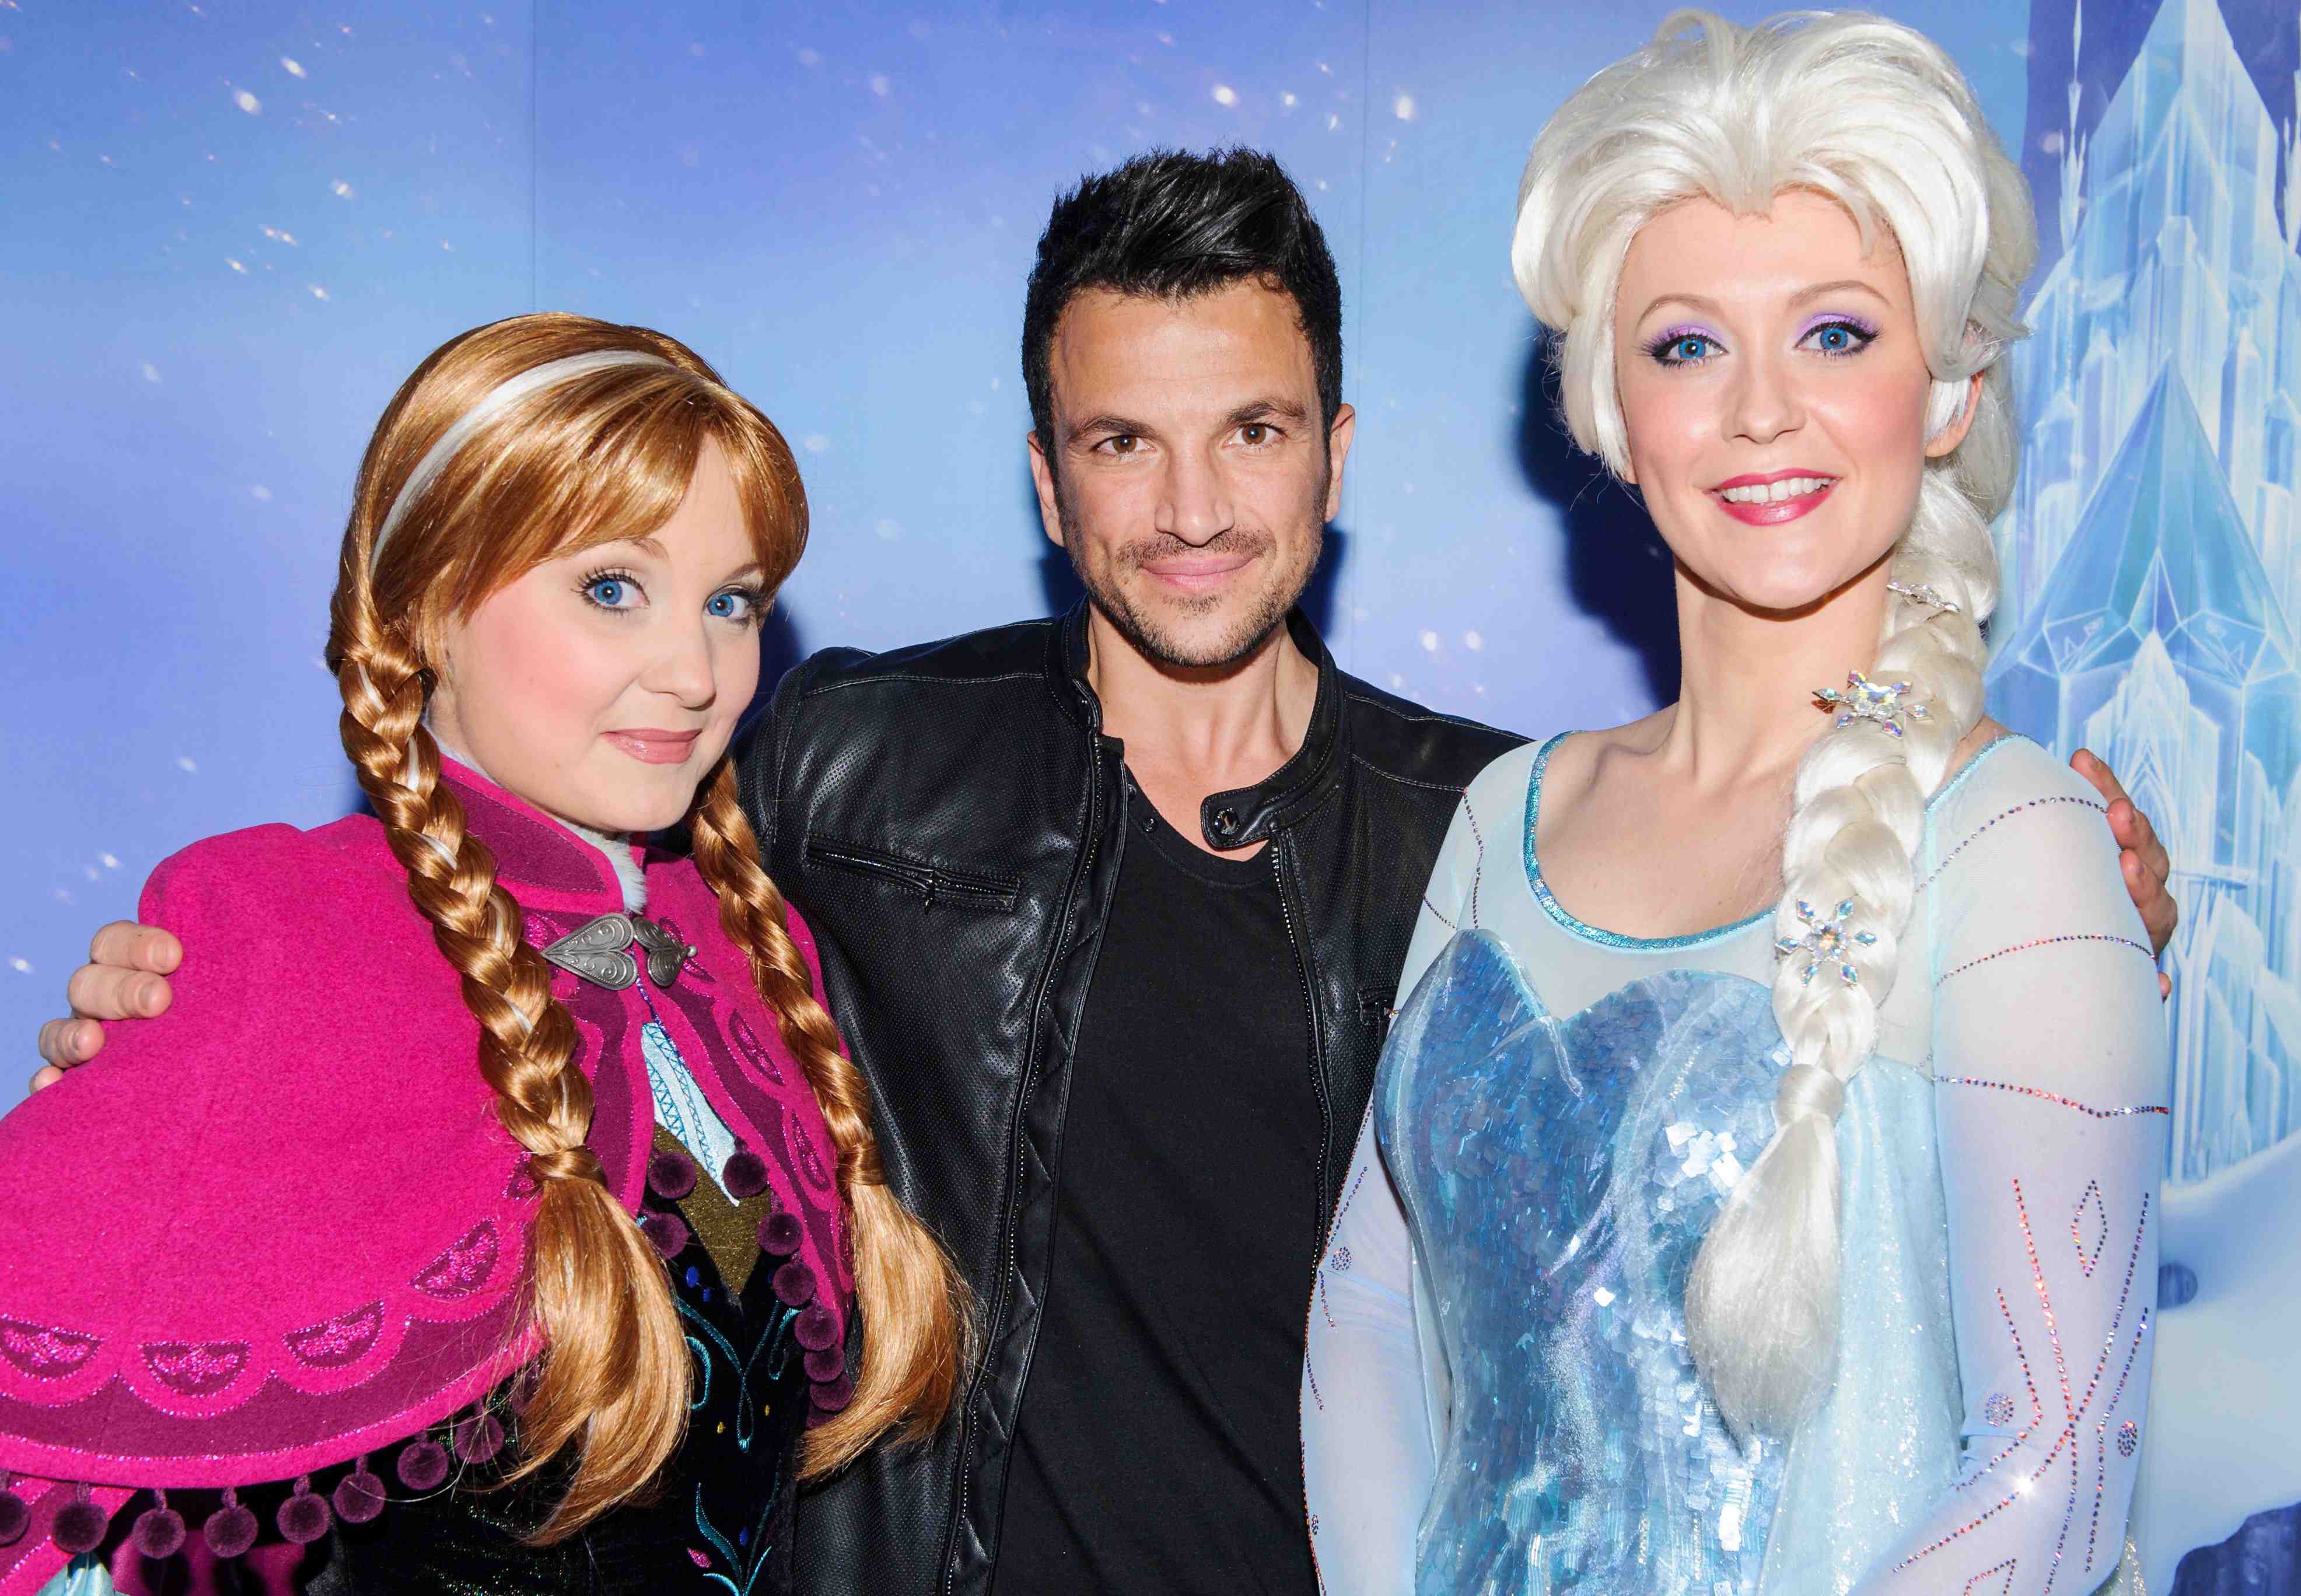 Frozen characters to feature in Disney on Ice